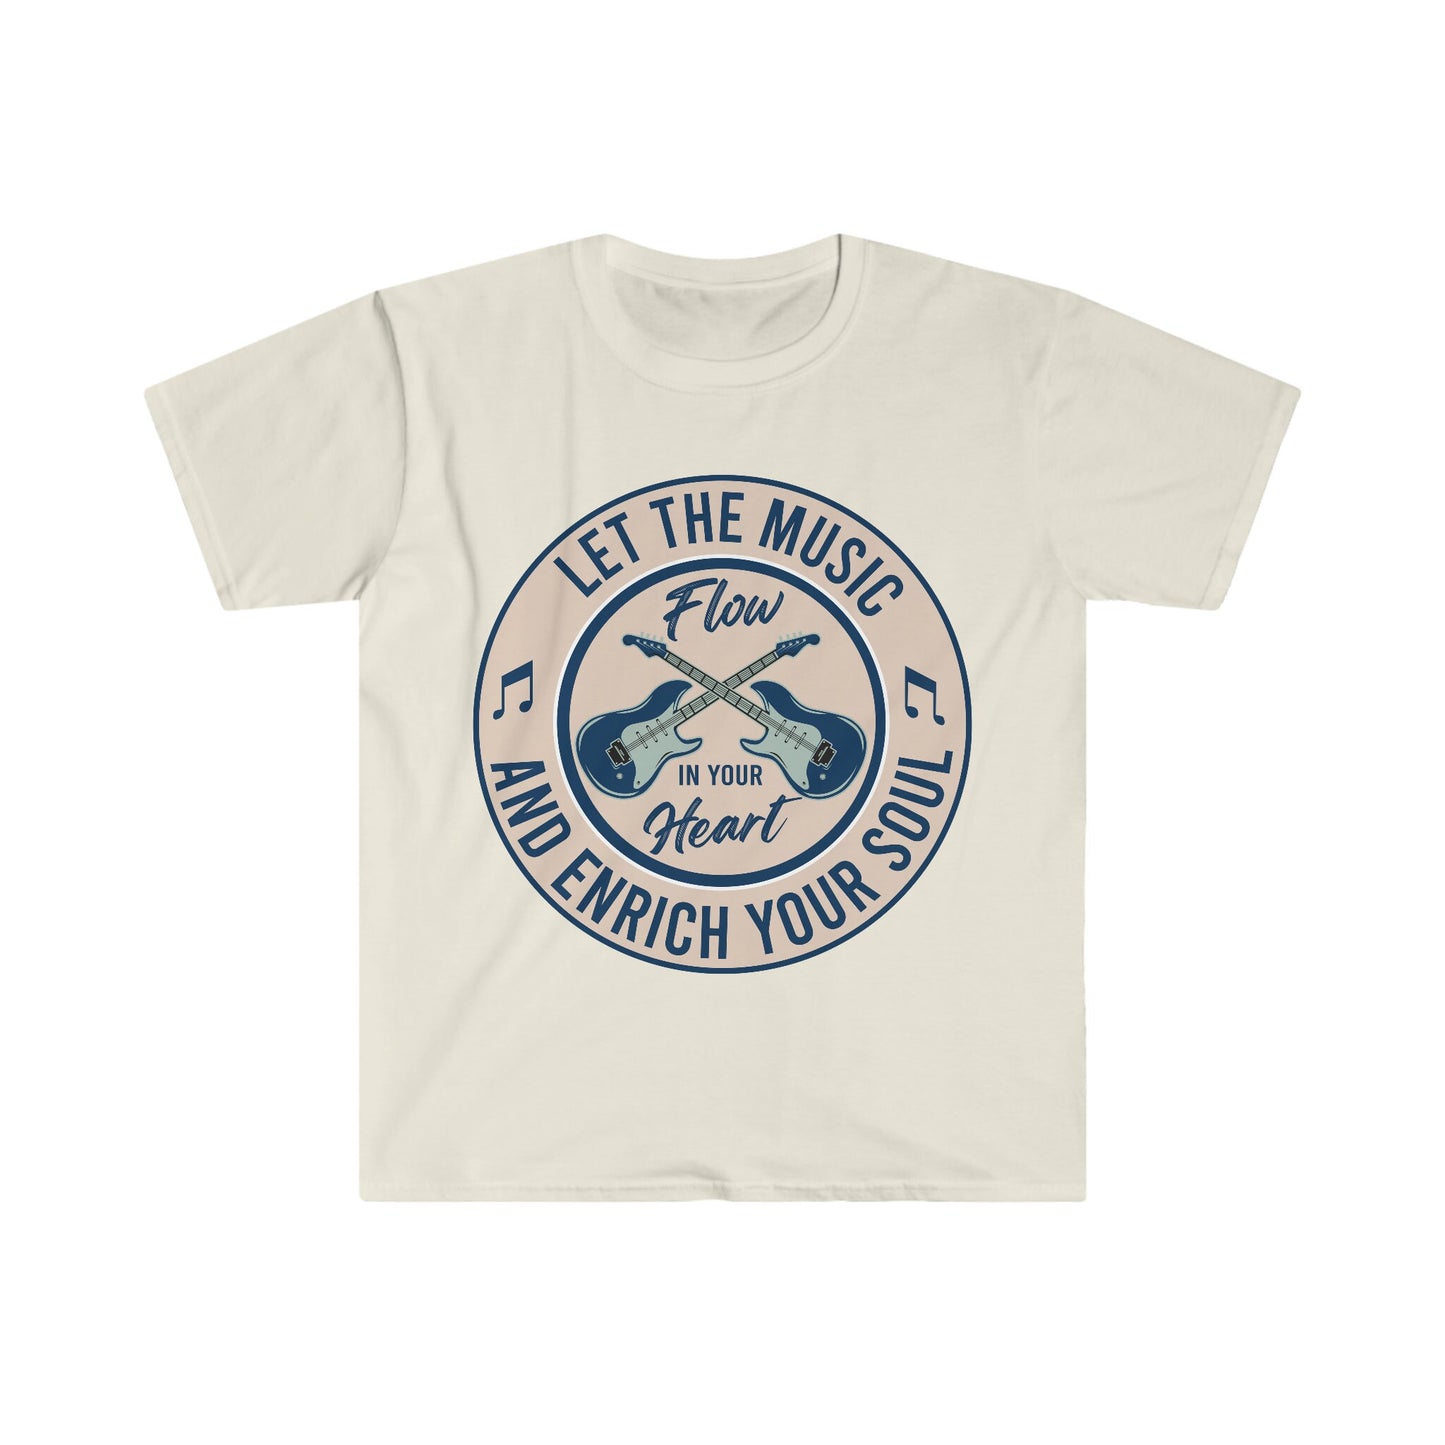 Let the Music Flow and Enrich Your Soul - Unisex Softstyle T-Shirt